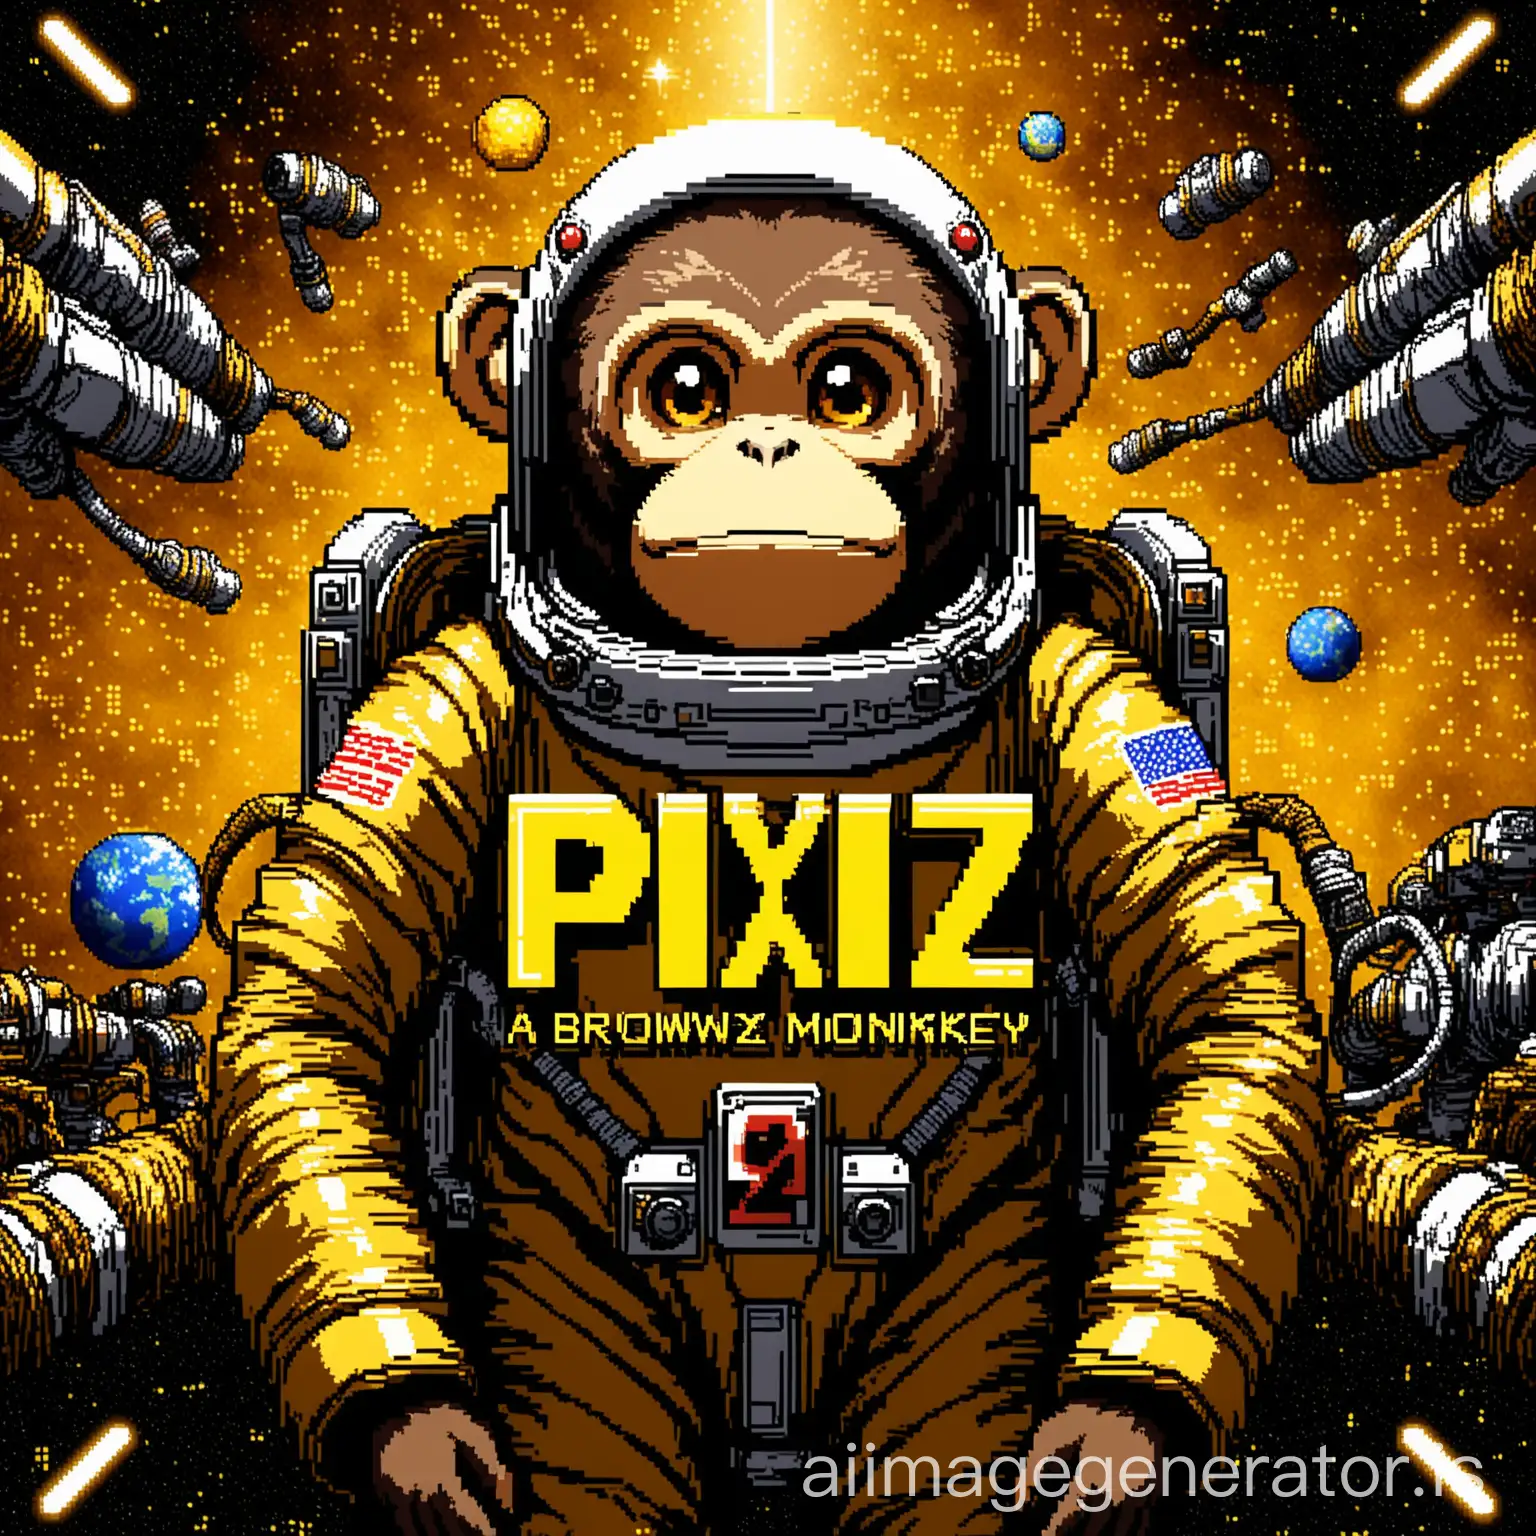 HighQuality-Pixel-Monkey-in-Yellow-Spacesuit-Detailed-Space-Exploration-Scene-with-PIXIZ-Text-Background